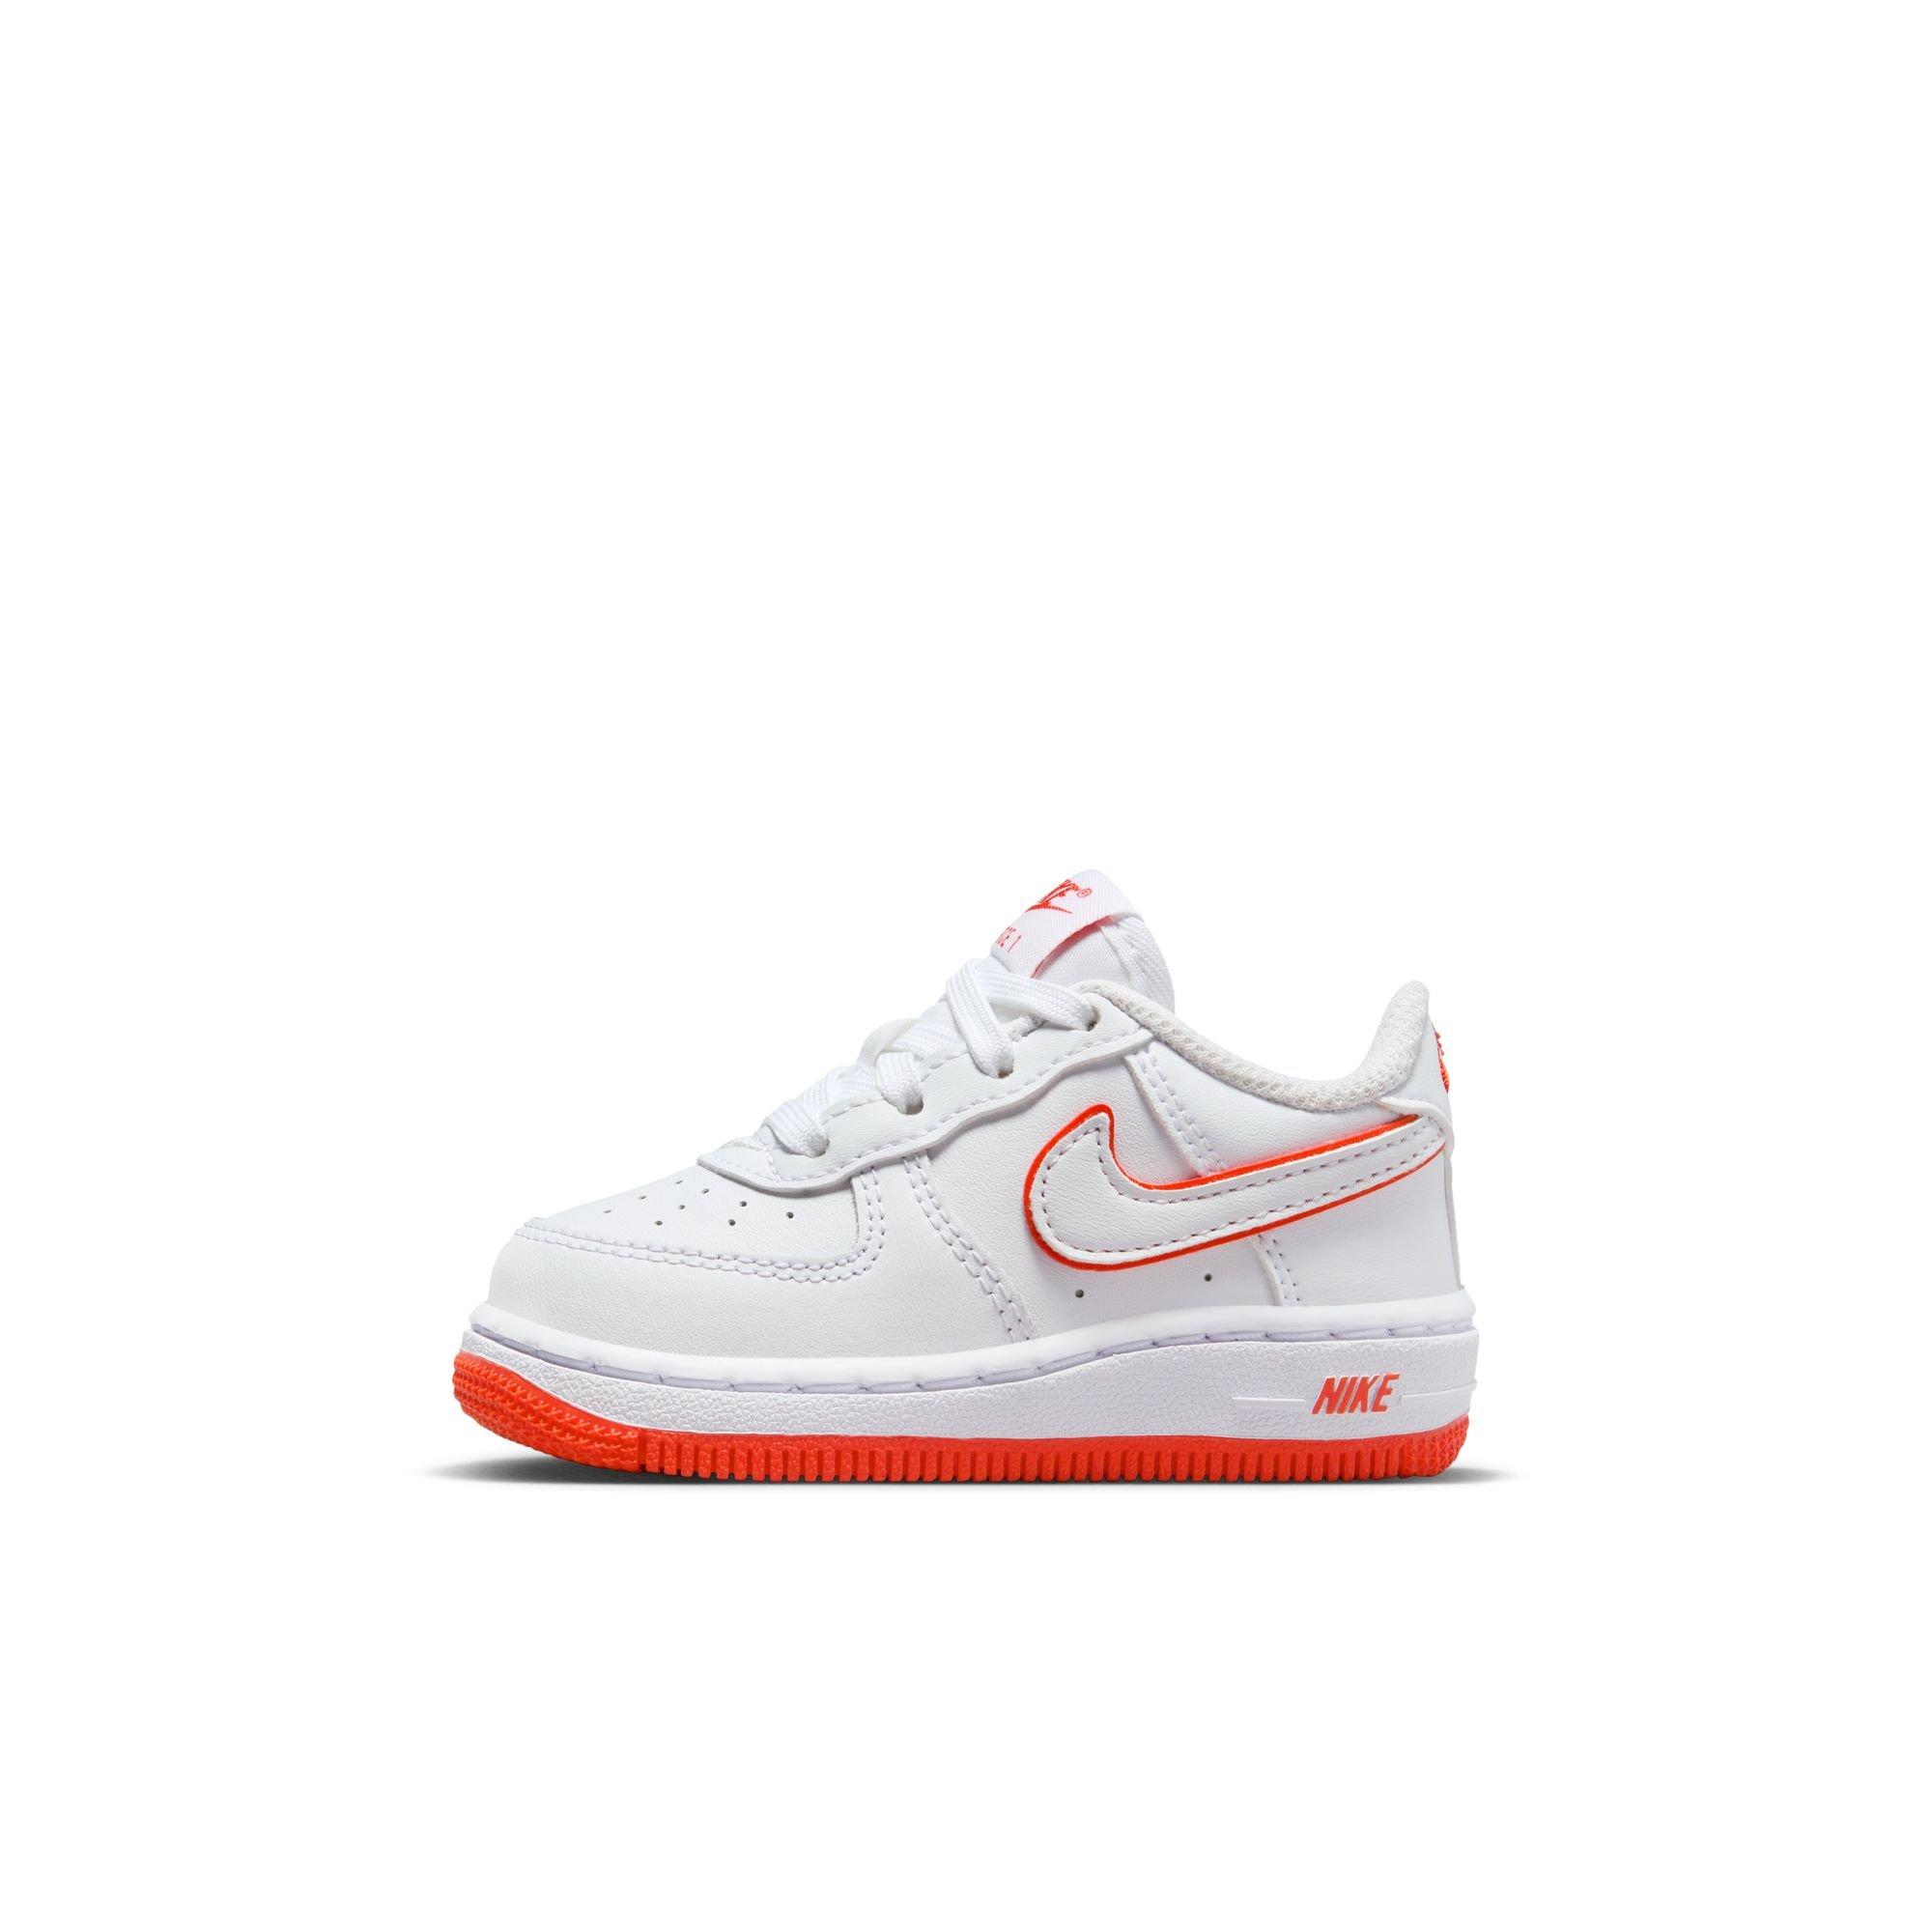 Nike Air Force 1 '07 Picante Red Review& On foot 